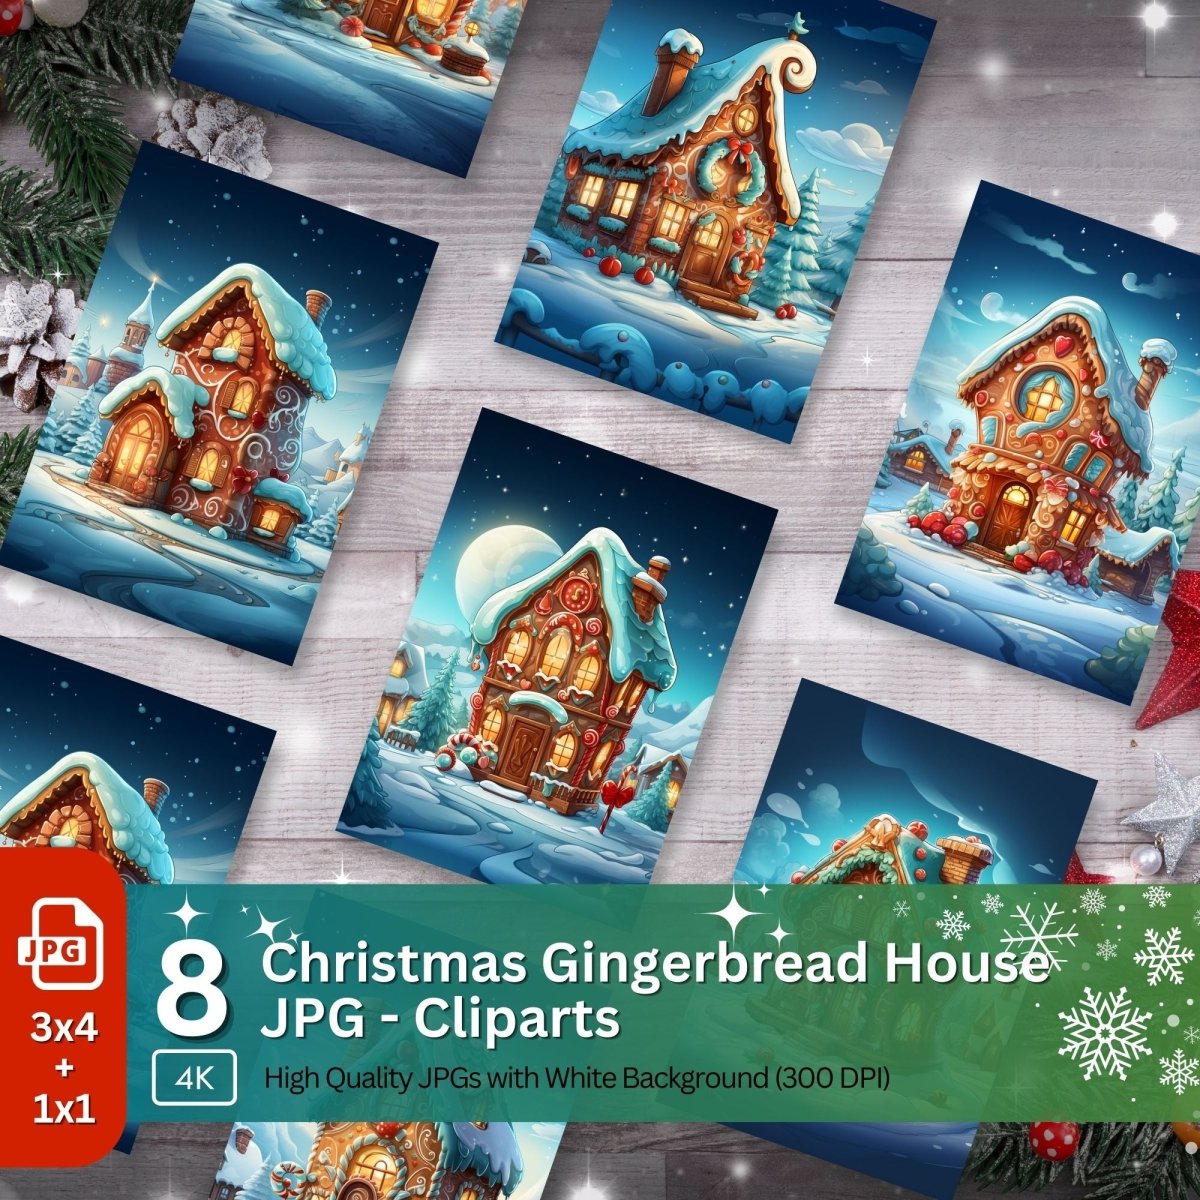 Gingerbread House Clipart 8 JPG Cute Christmas Card Graphic - Everything Pixel